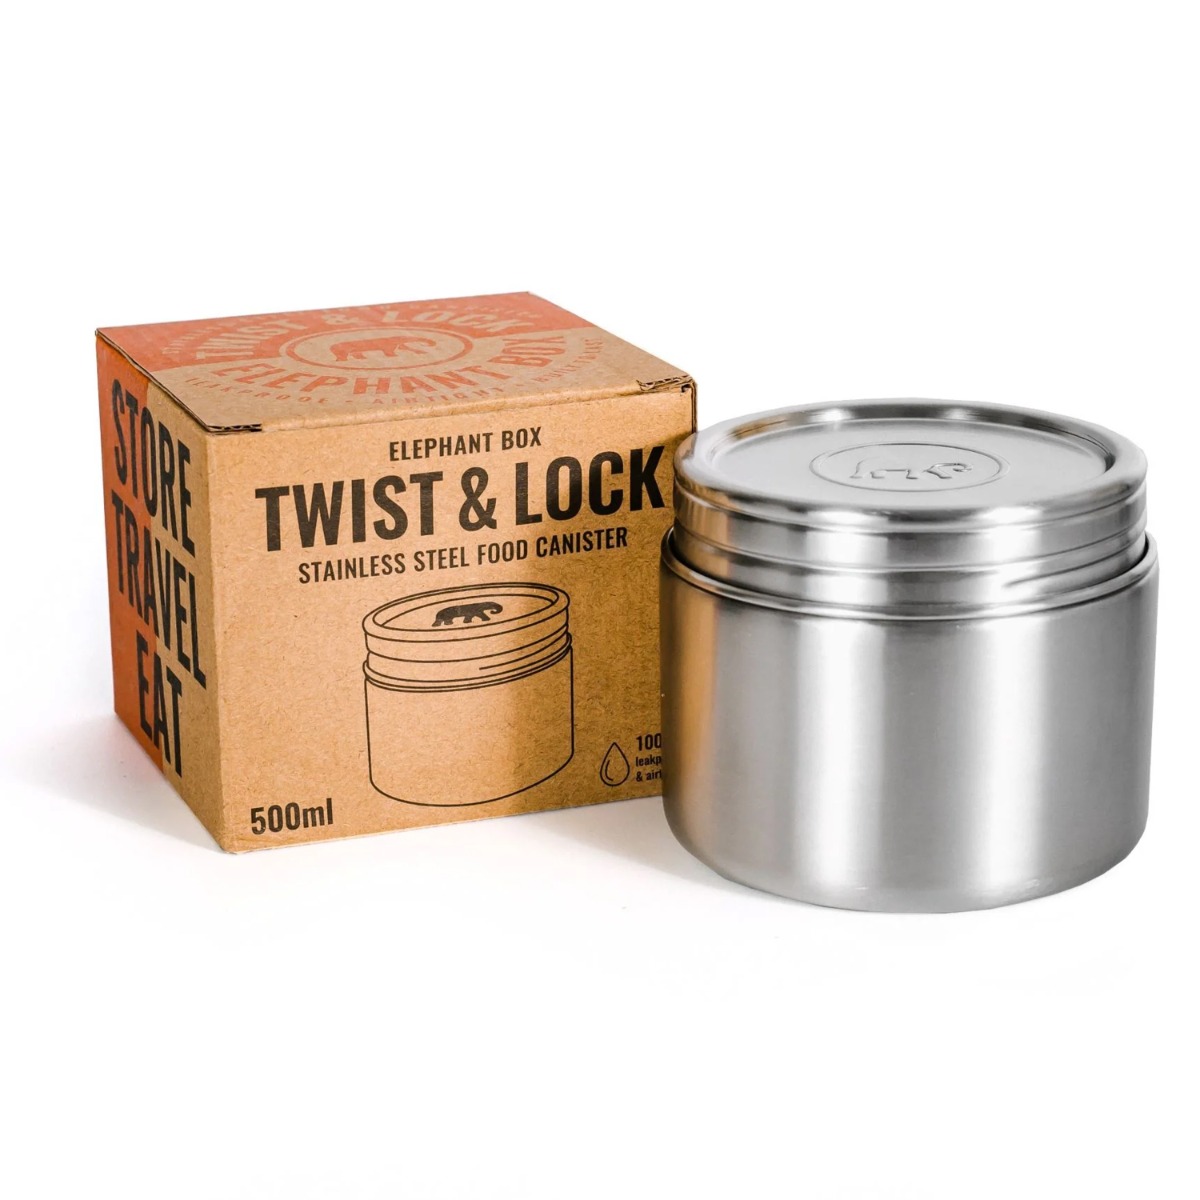 Elephant Box Twist & Lock Stainless Steel Canister - 500ml